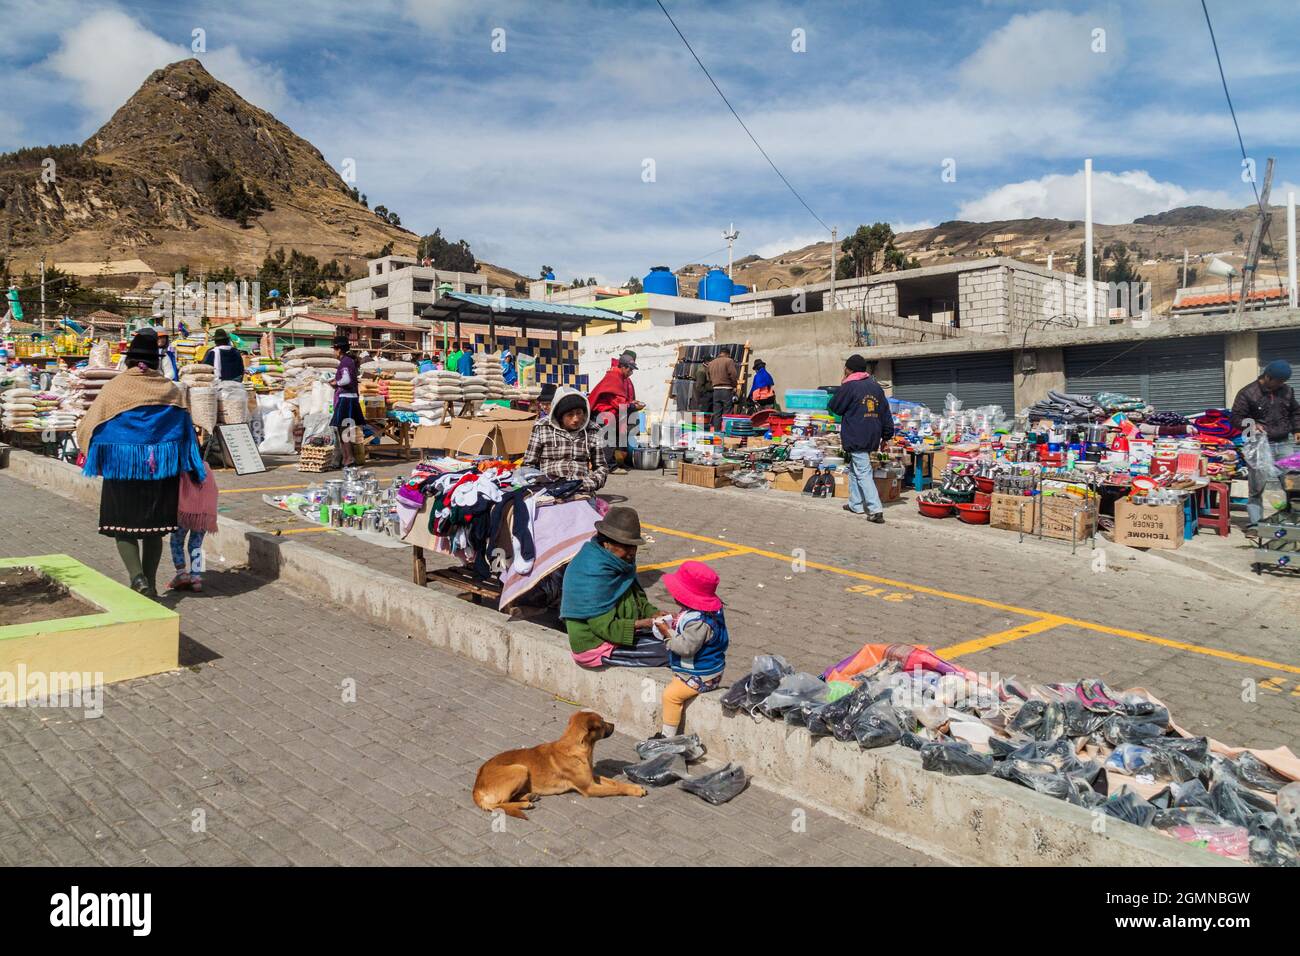 ZUMBAHUA, ECUADOR - JULY 4, 2015: View of a traditional Saturday market in a remote village Zumbahua Stock Photo